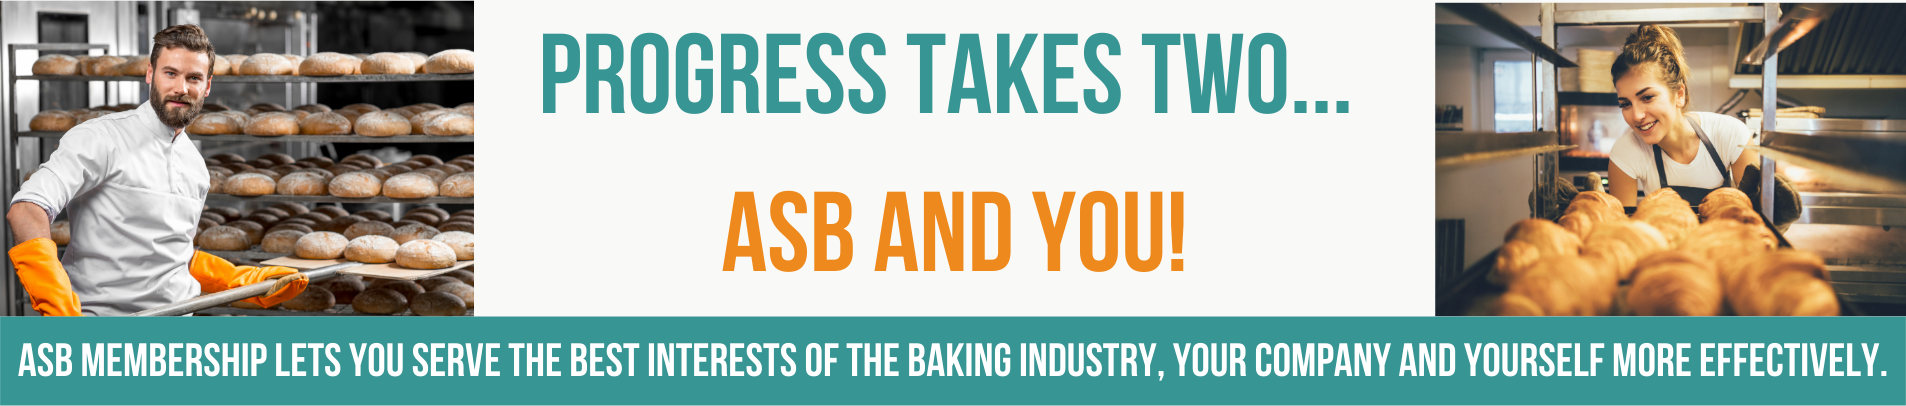 The professional benefits of a membership with ASB for baking professionals.